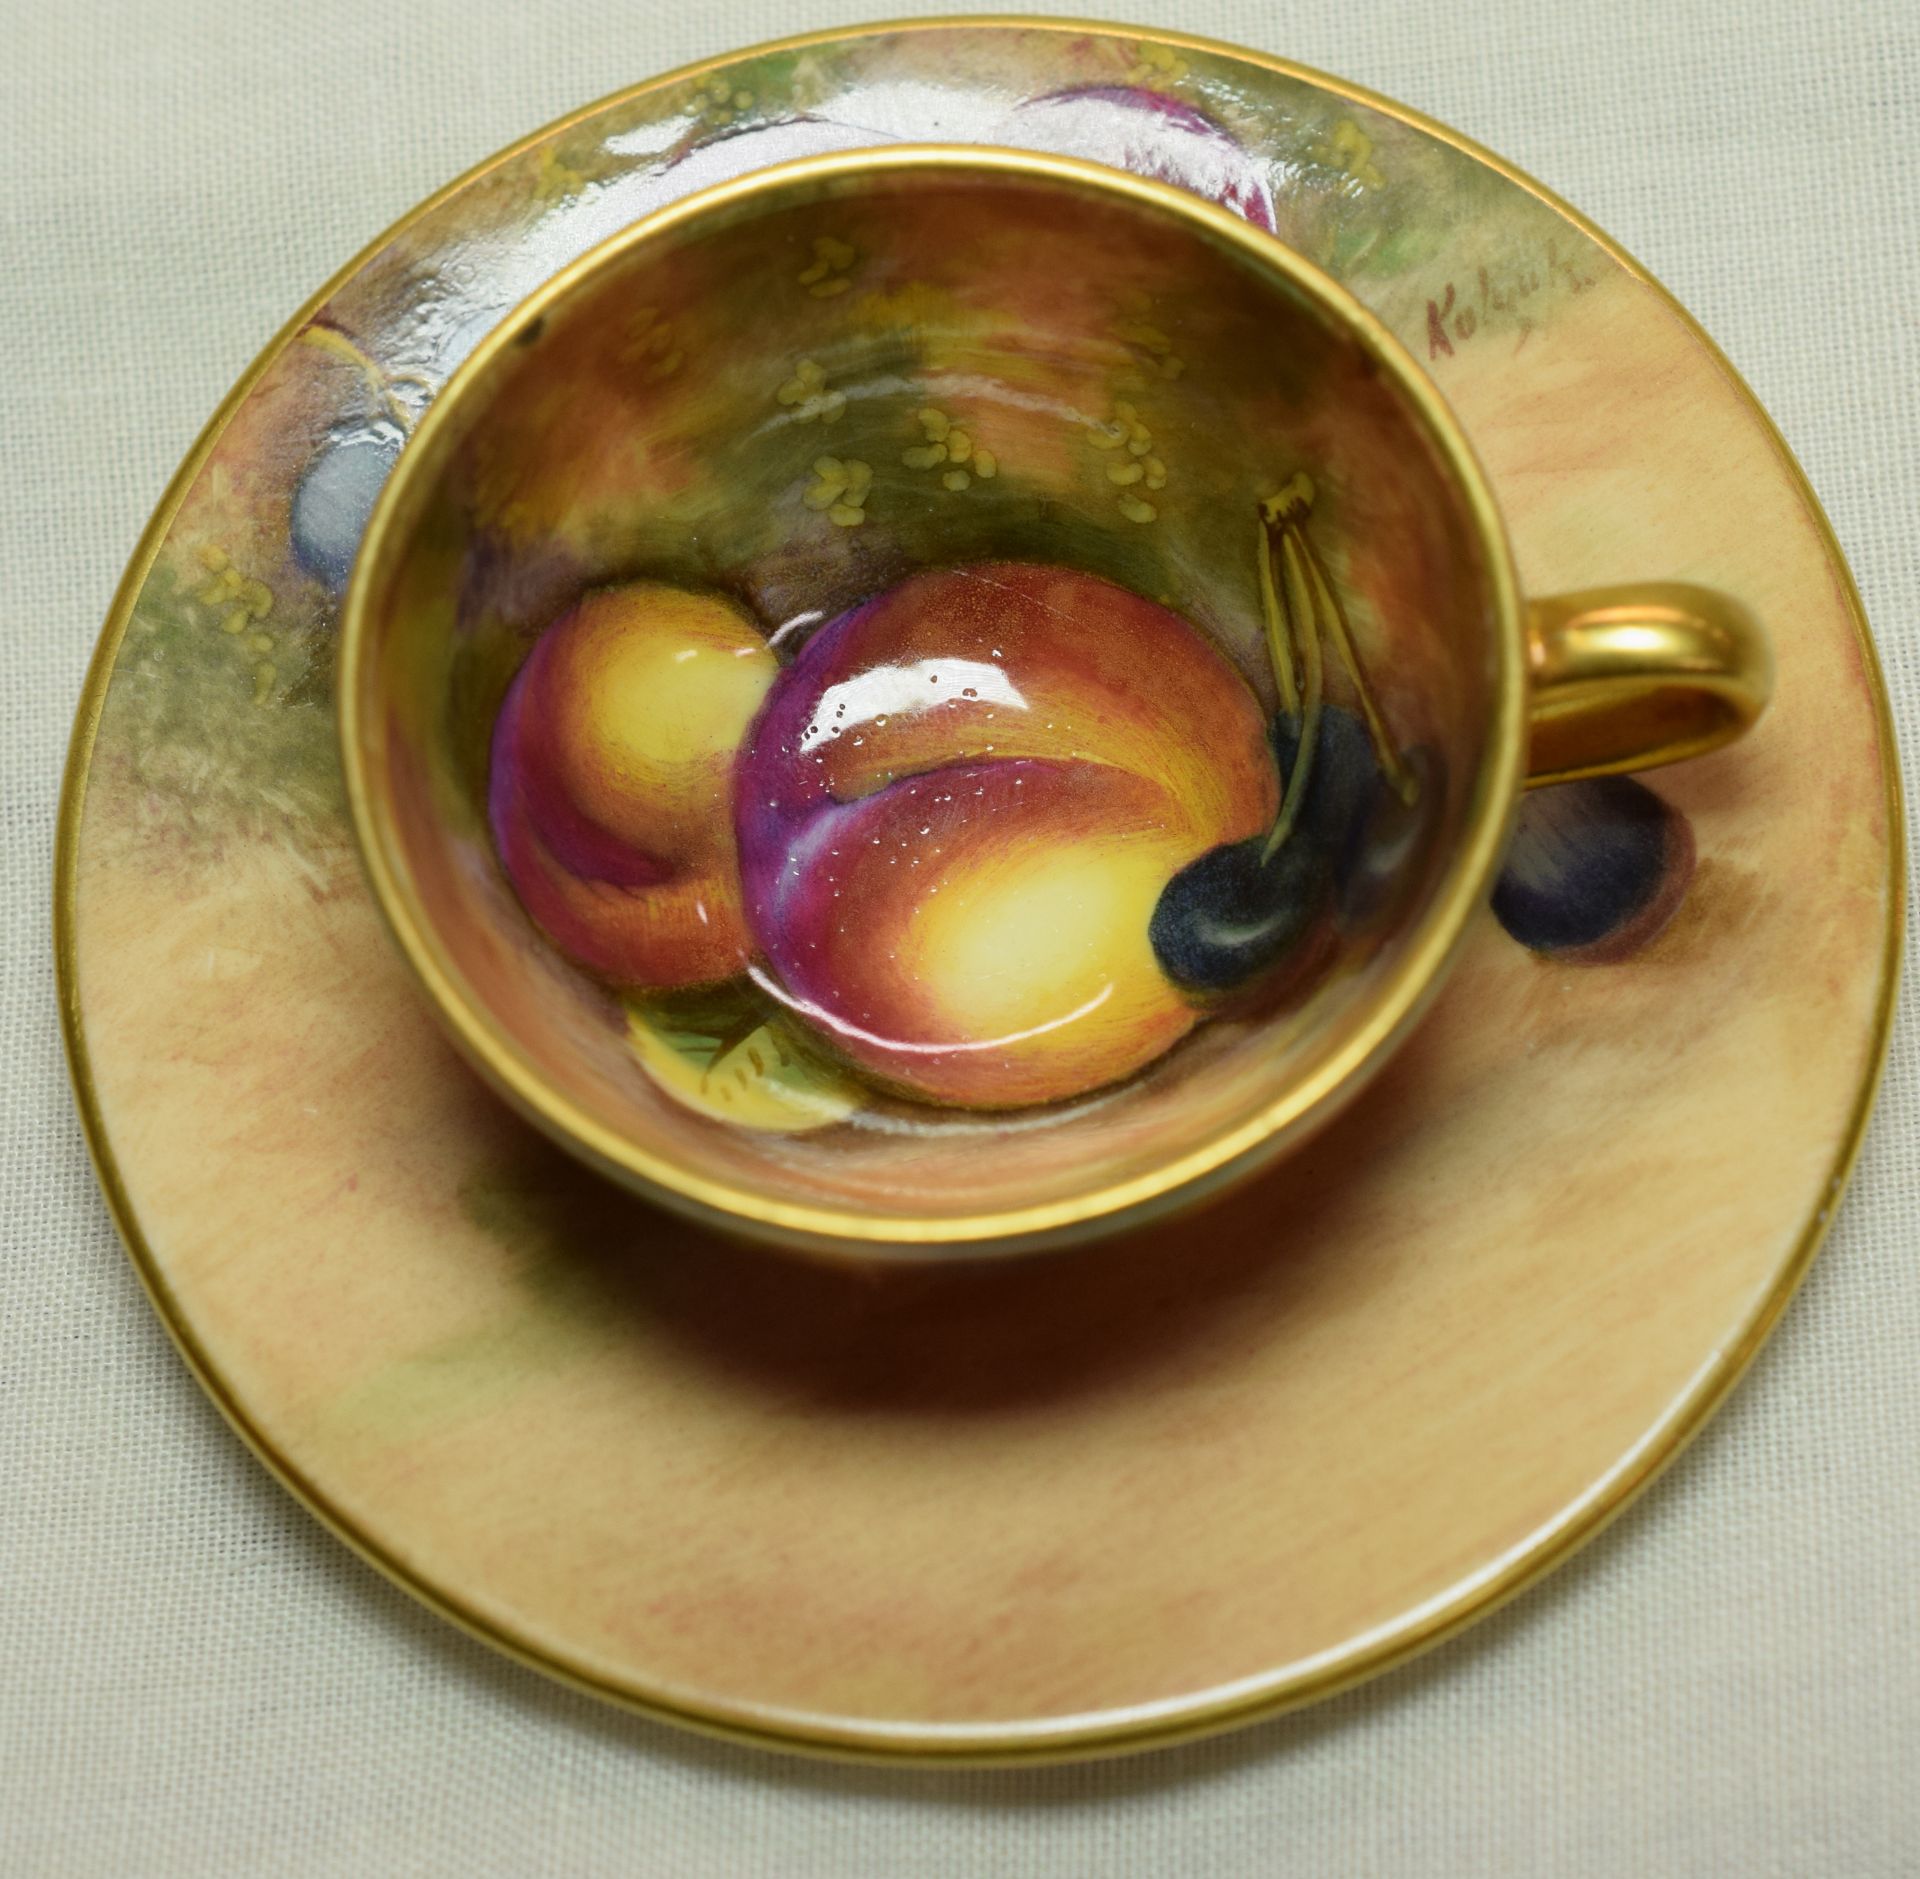 Royal Worcester Hand Painted Tea Cup And Saucer Possible Kitty Blake ***Reserve Lowered*** - Image 2 of 8